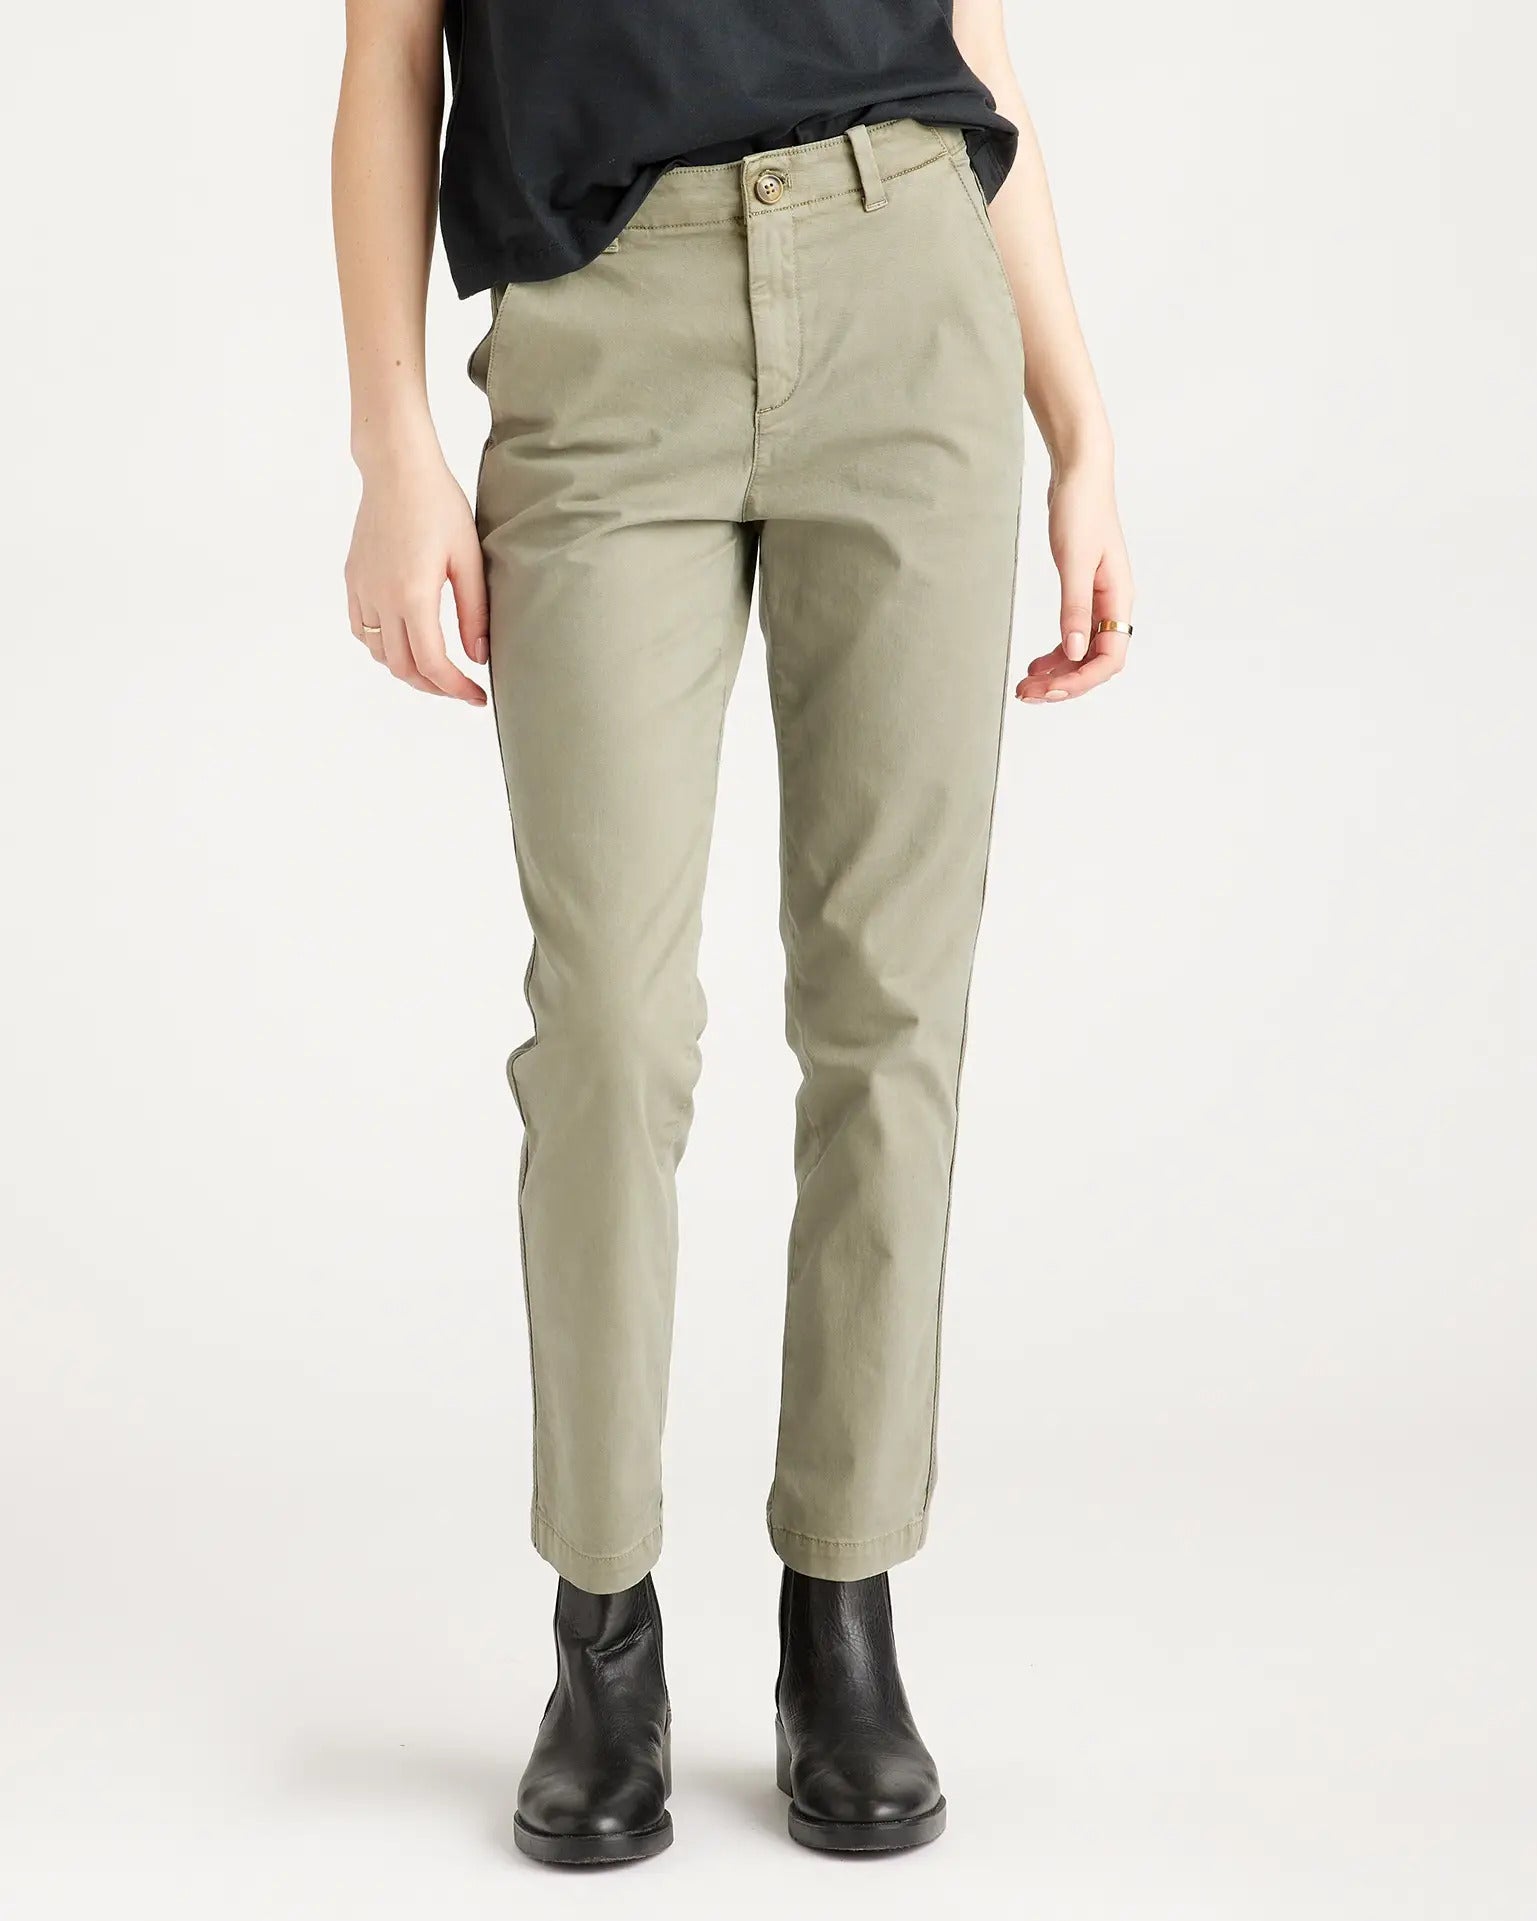 Quince + Stretch Cotton Twill Girlfriend Chino Pants